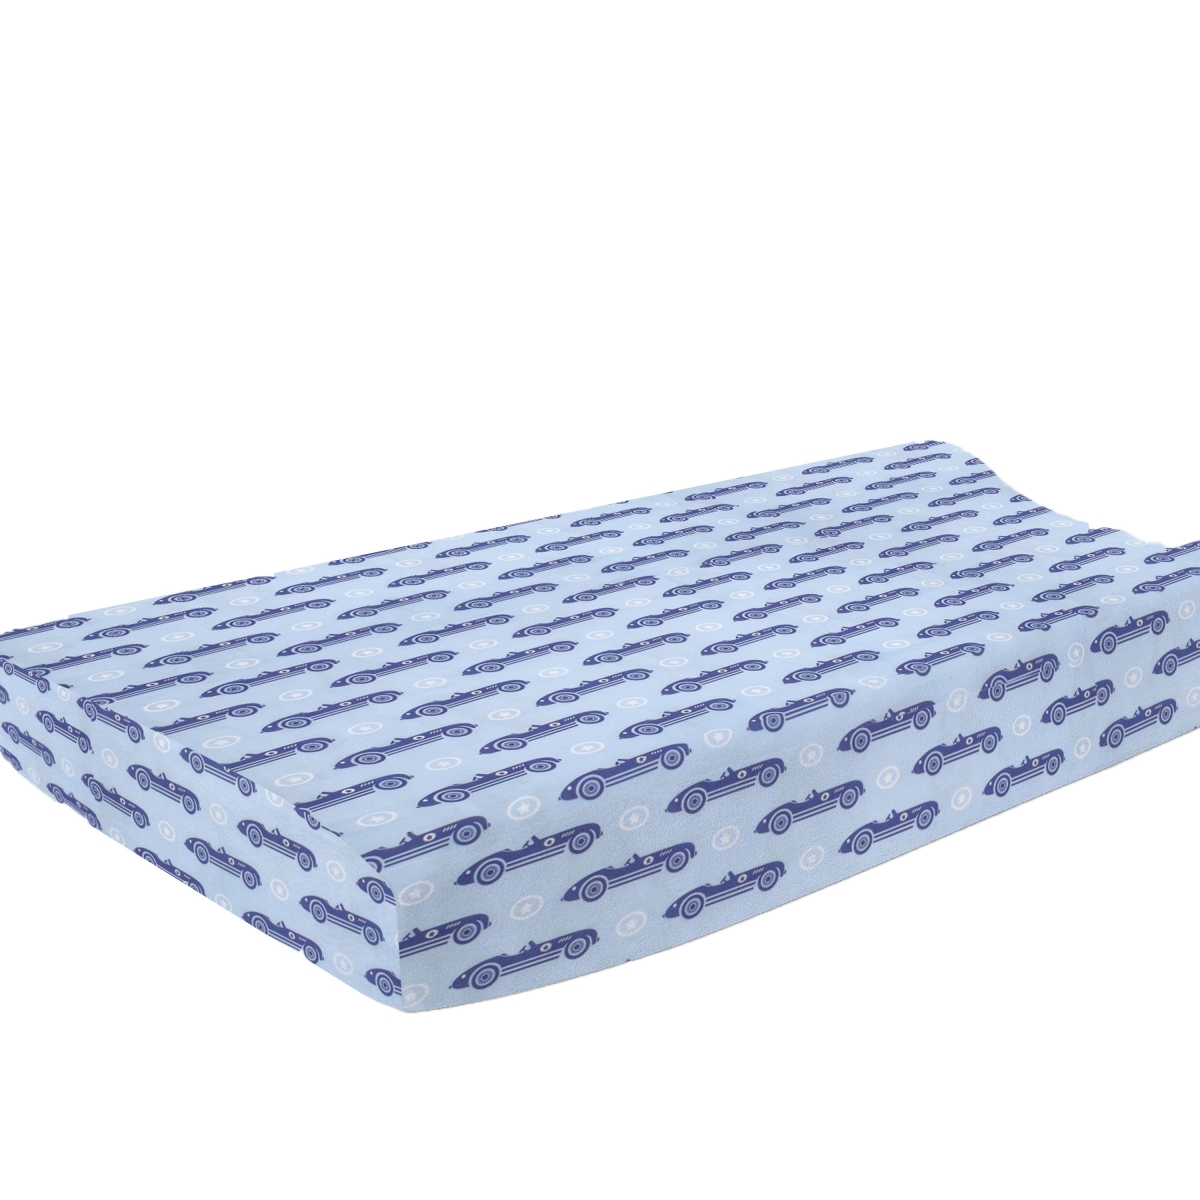 Cpc-cars 32 X 16 X 5 In. Classic Racecars Changing Pad Cover Navy Blue & Baby Blue